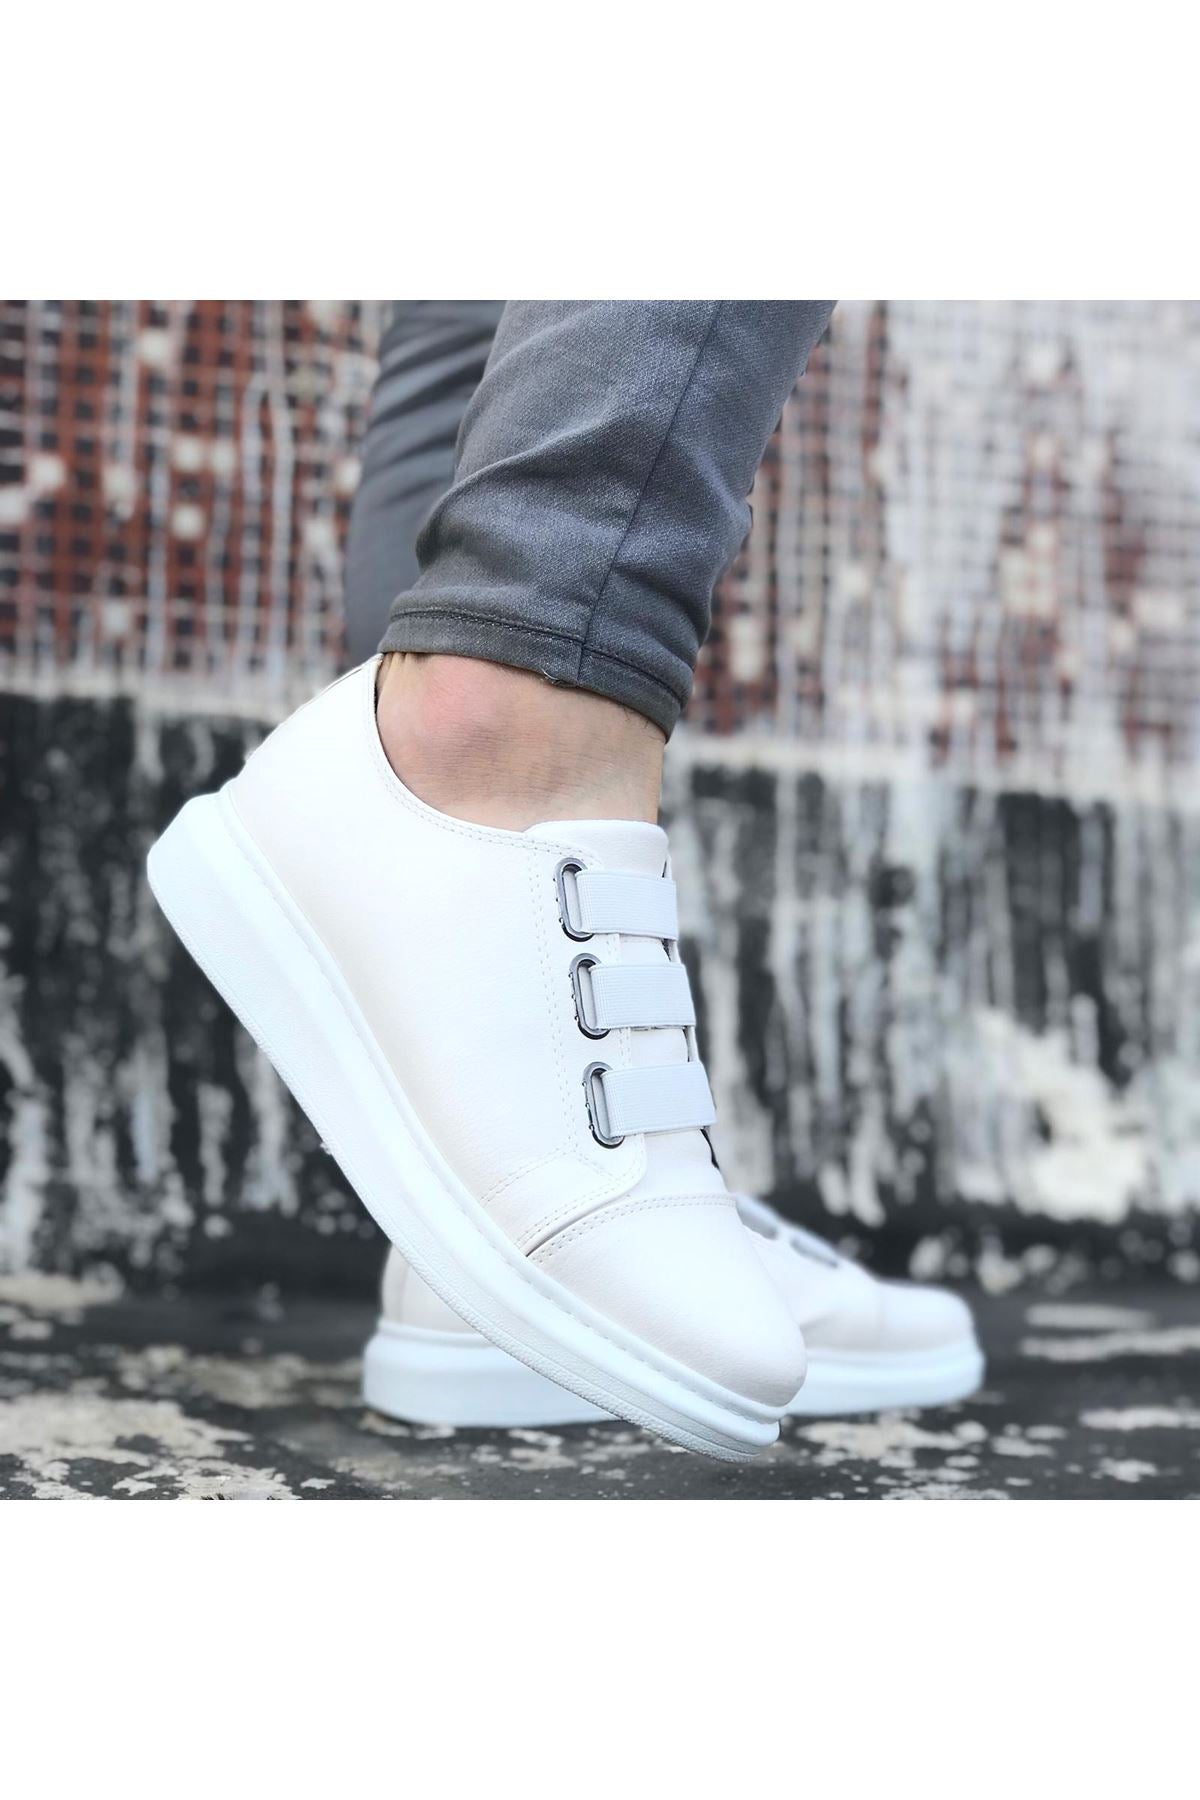 WG026 White Thick Sole Casual Men's Shoes - STREETMODE™